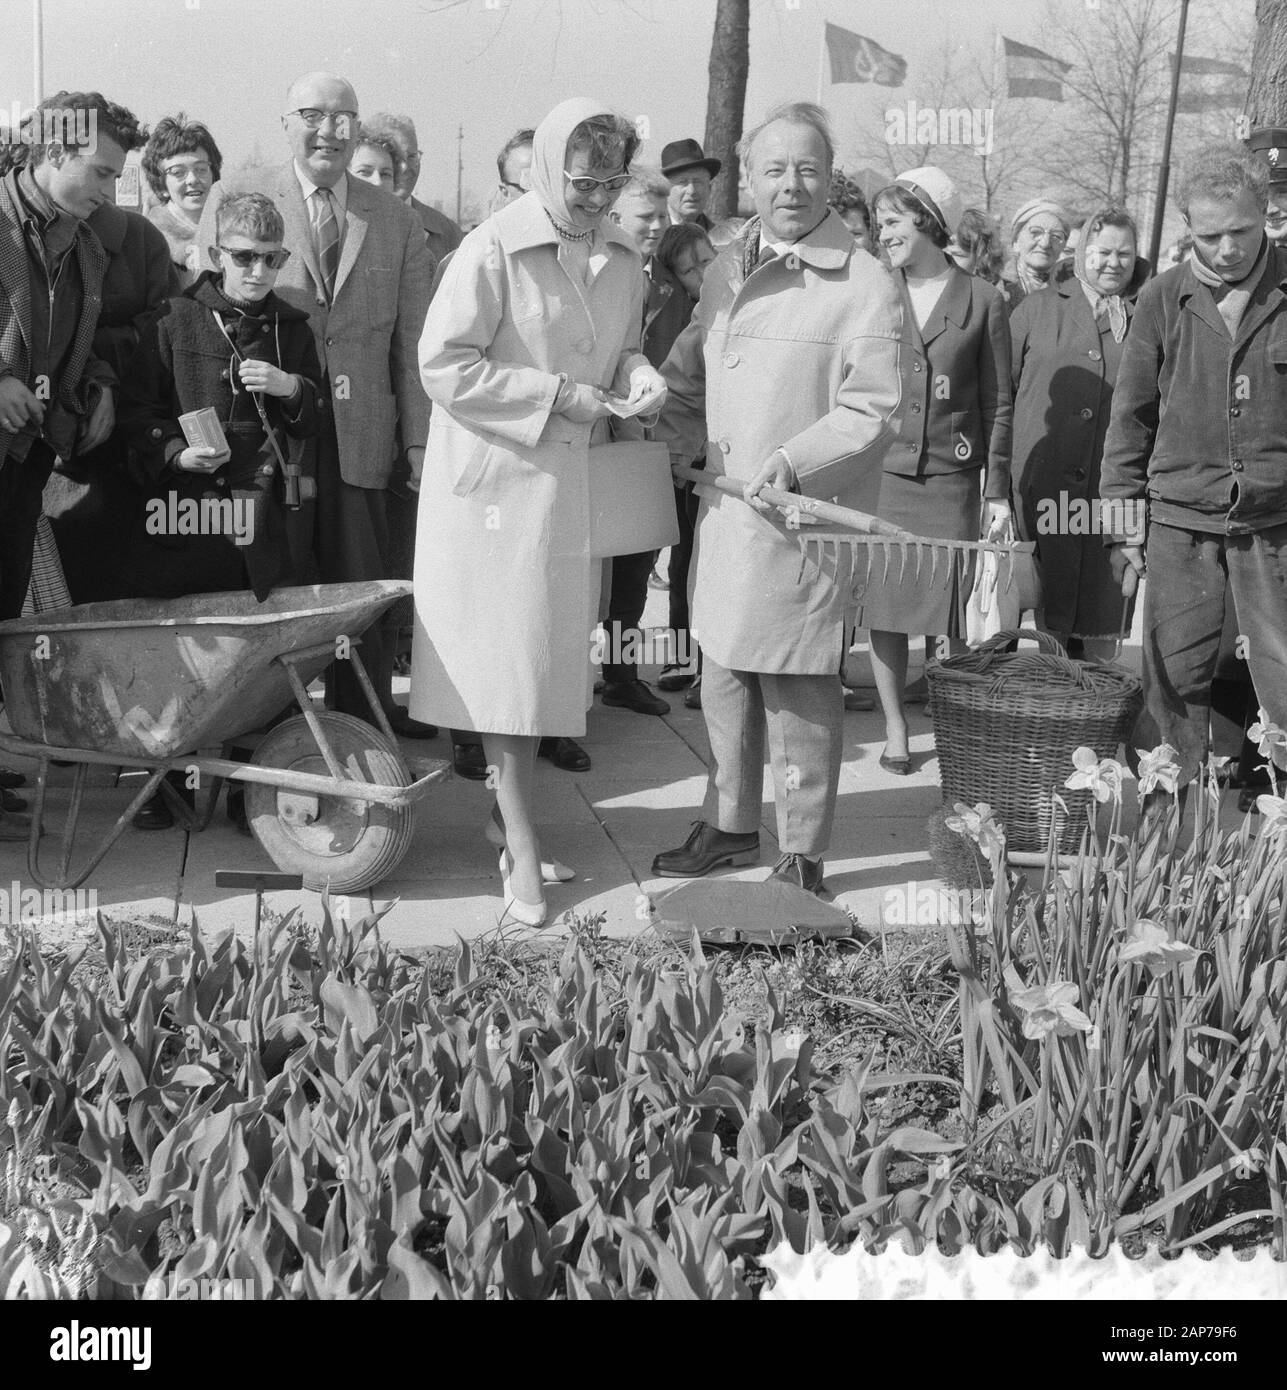 Visit Heinz Ruhmann and wife at the Floriade Date: 14 April 1960 Keywords: Wife, visits Personal name: Heinz Ruhmann Institution name: Floriade Stock Photo